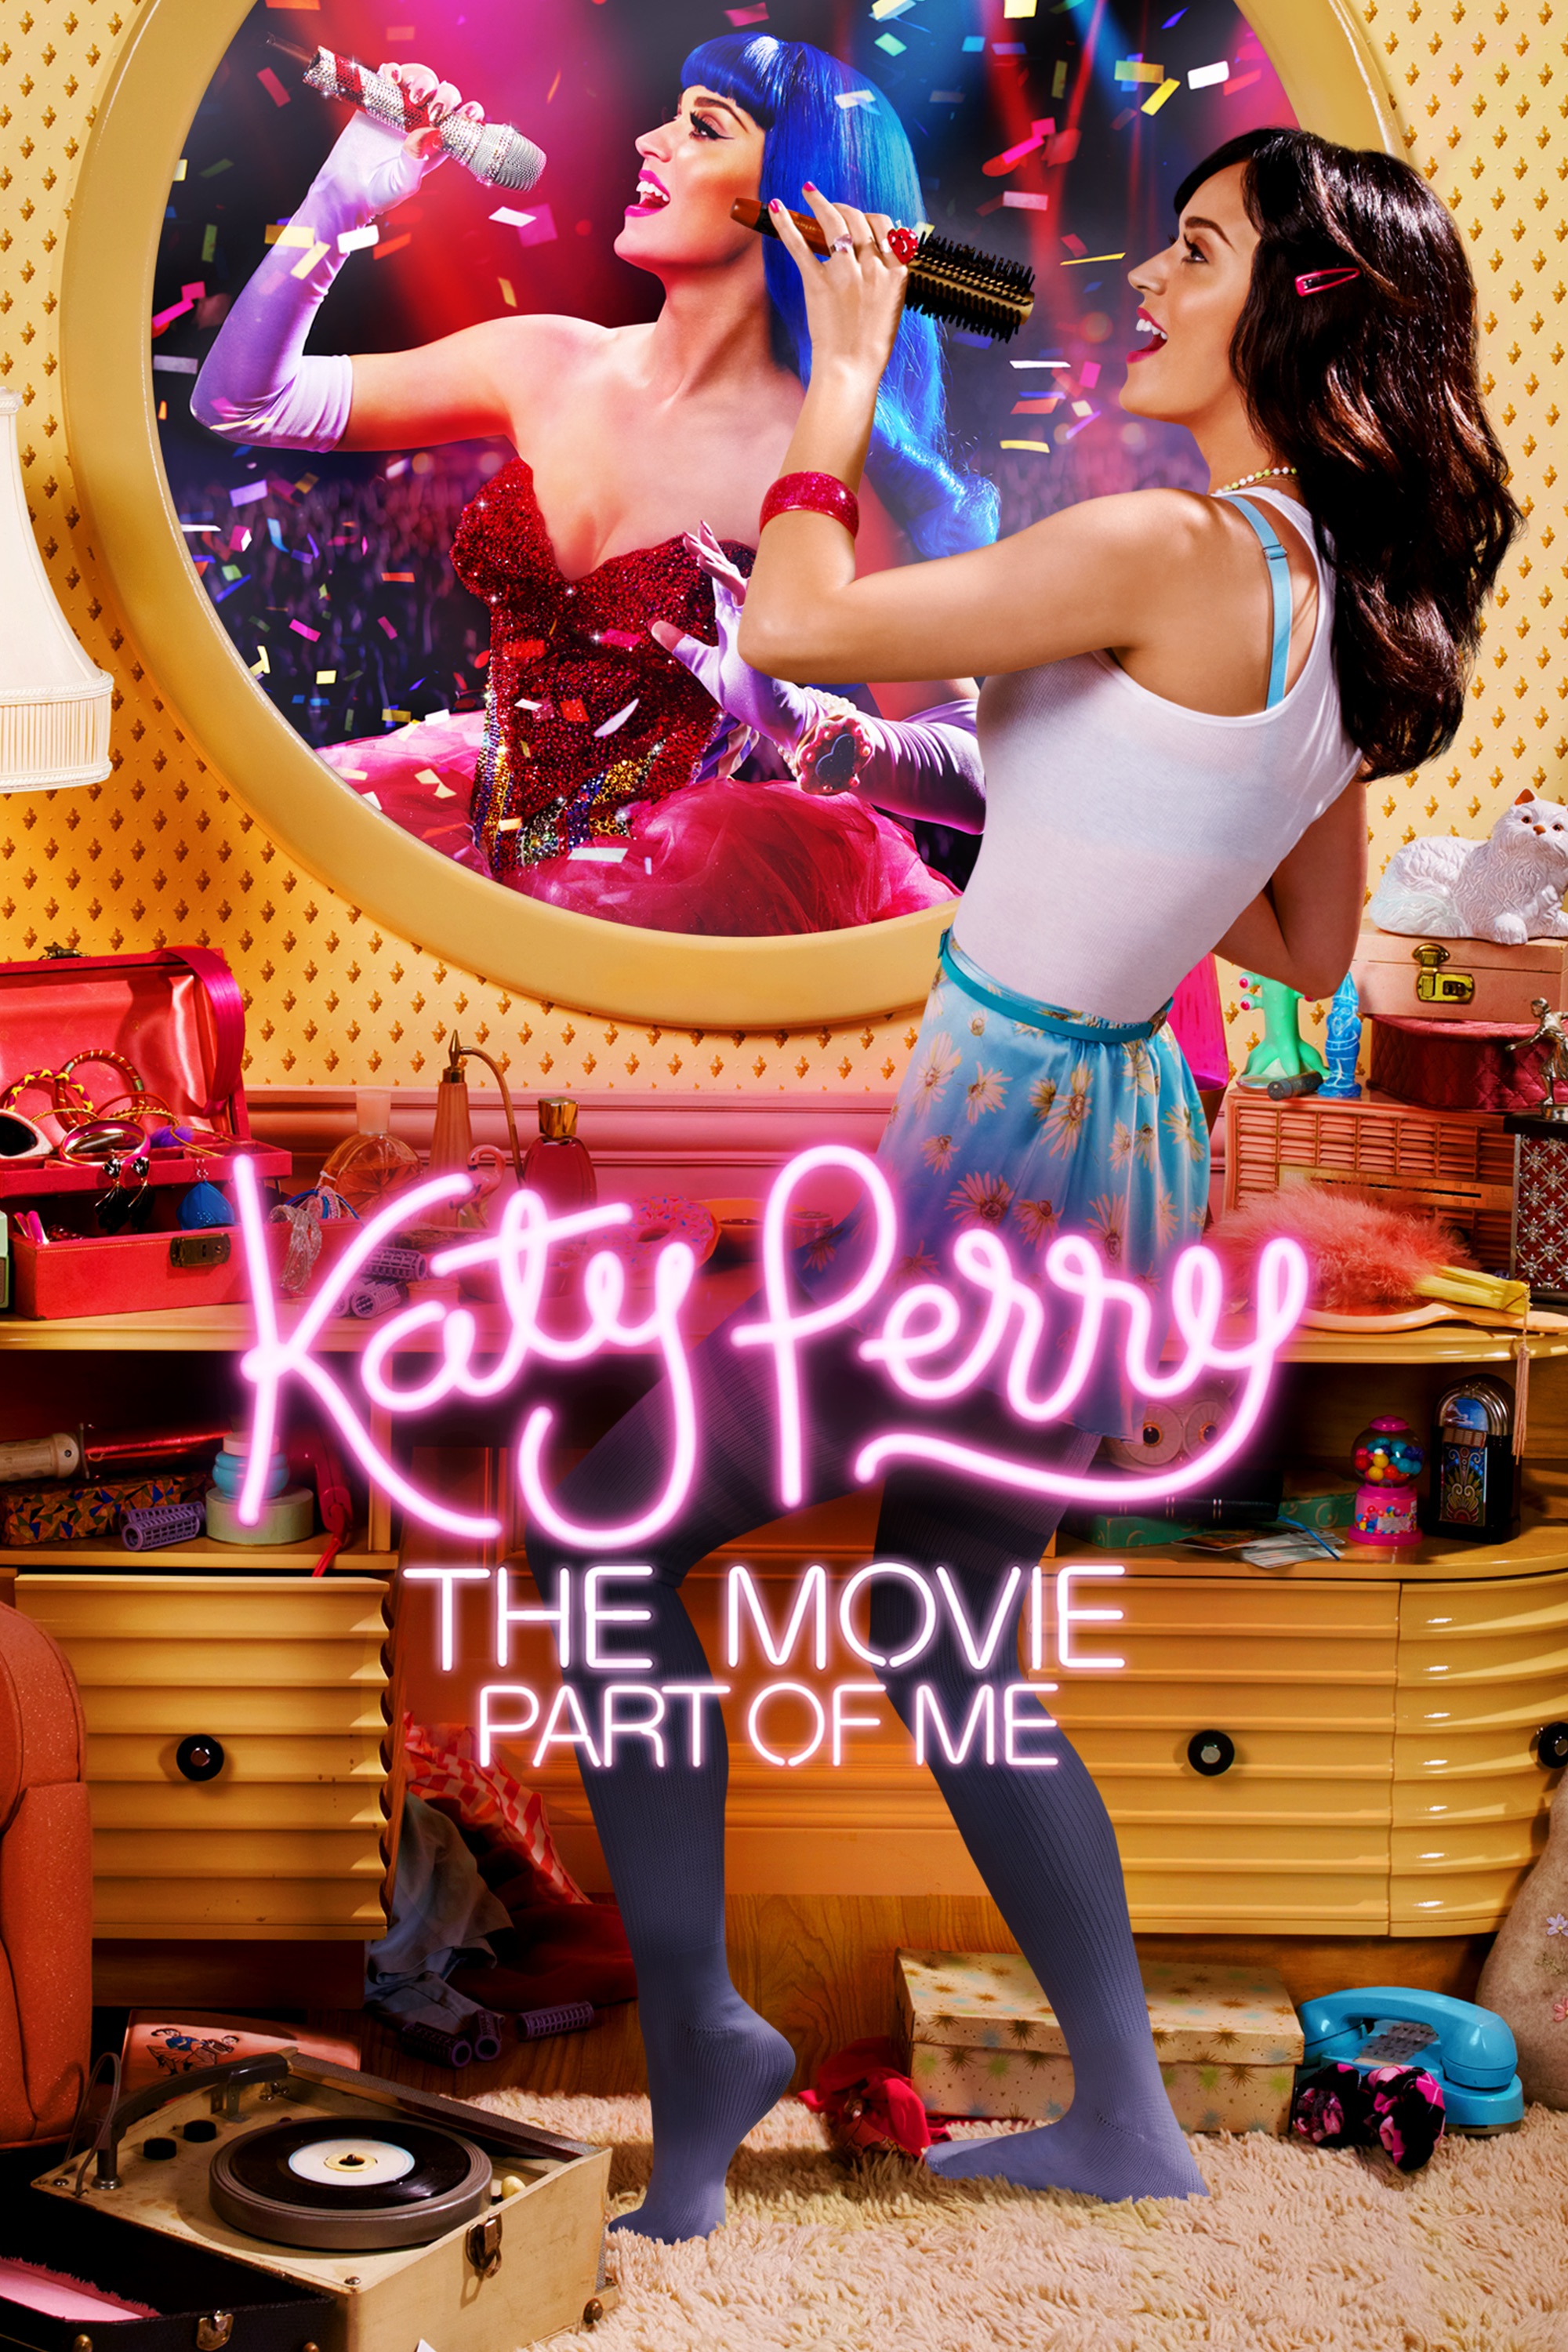 Katy Perry the Movie: Part of Me on iTunes